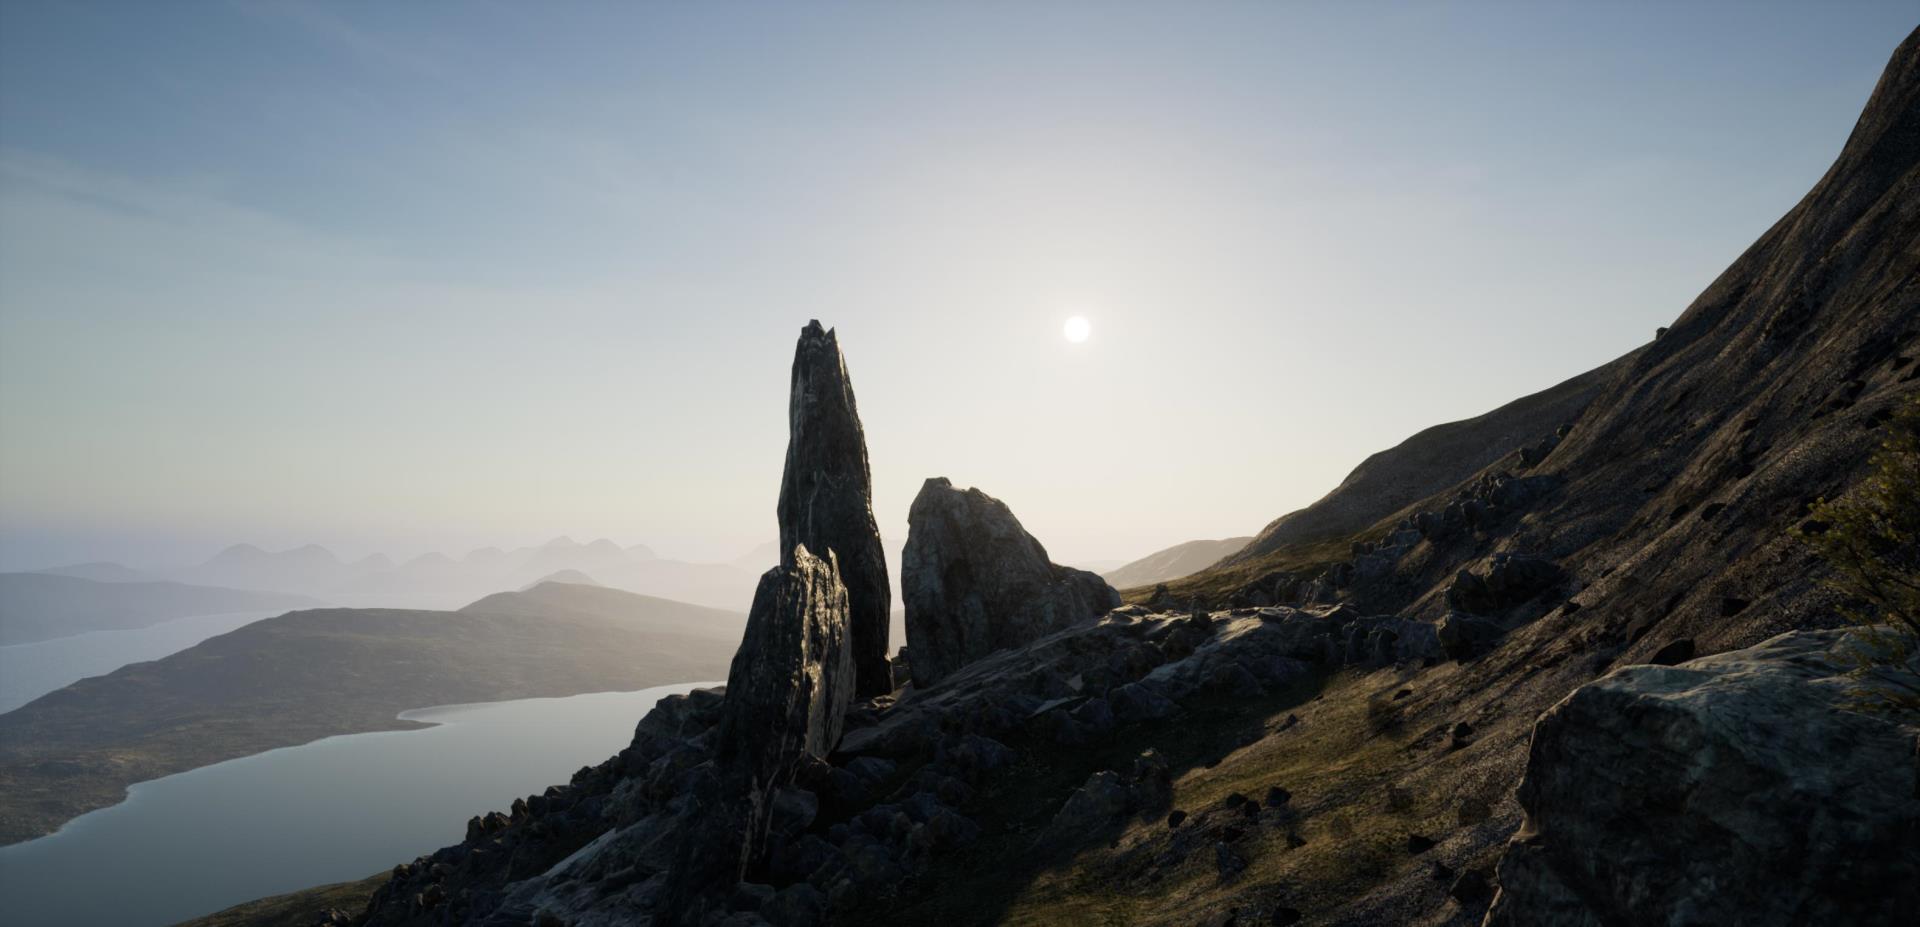 A landmark of the Isle of Skye which will be reproduced in the video game.